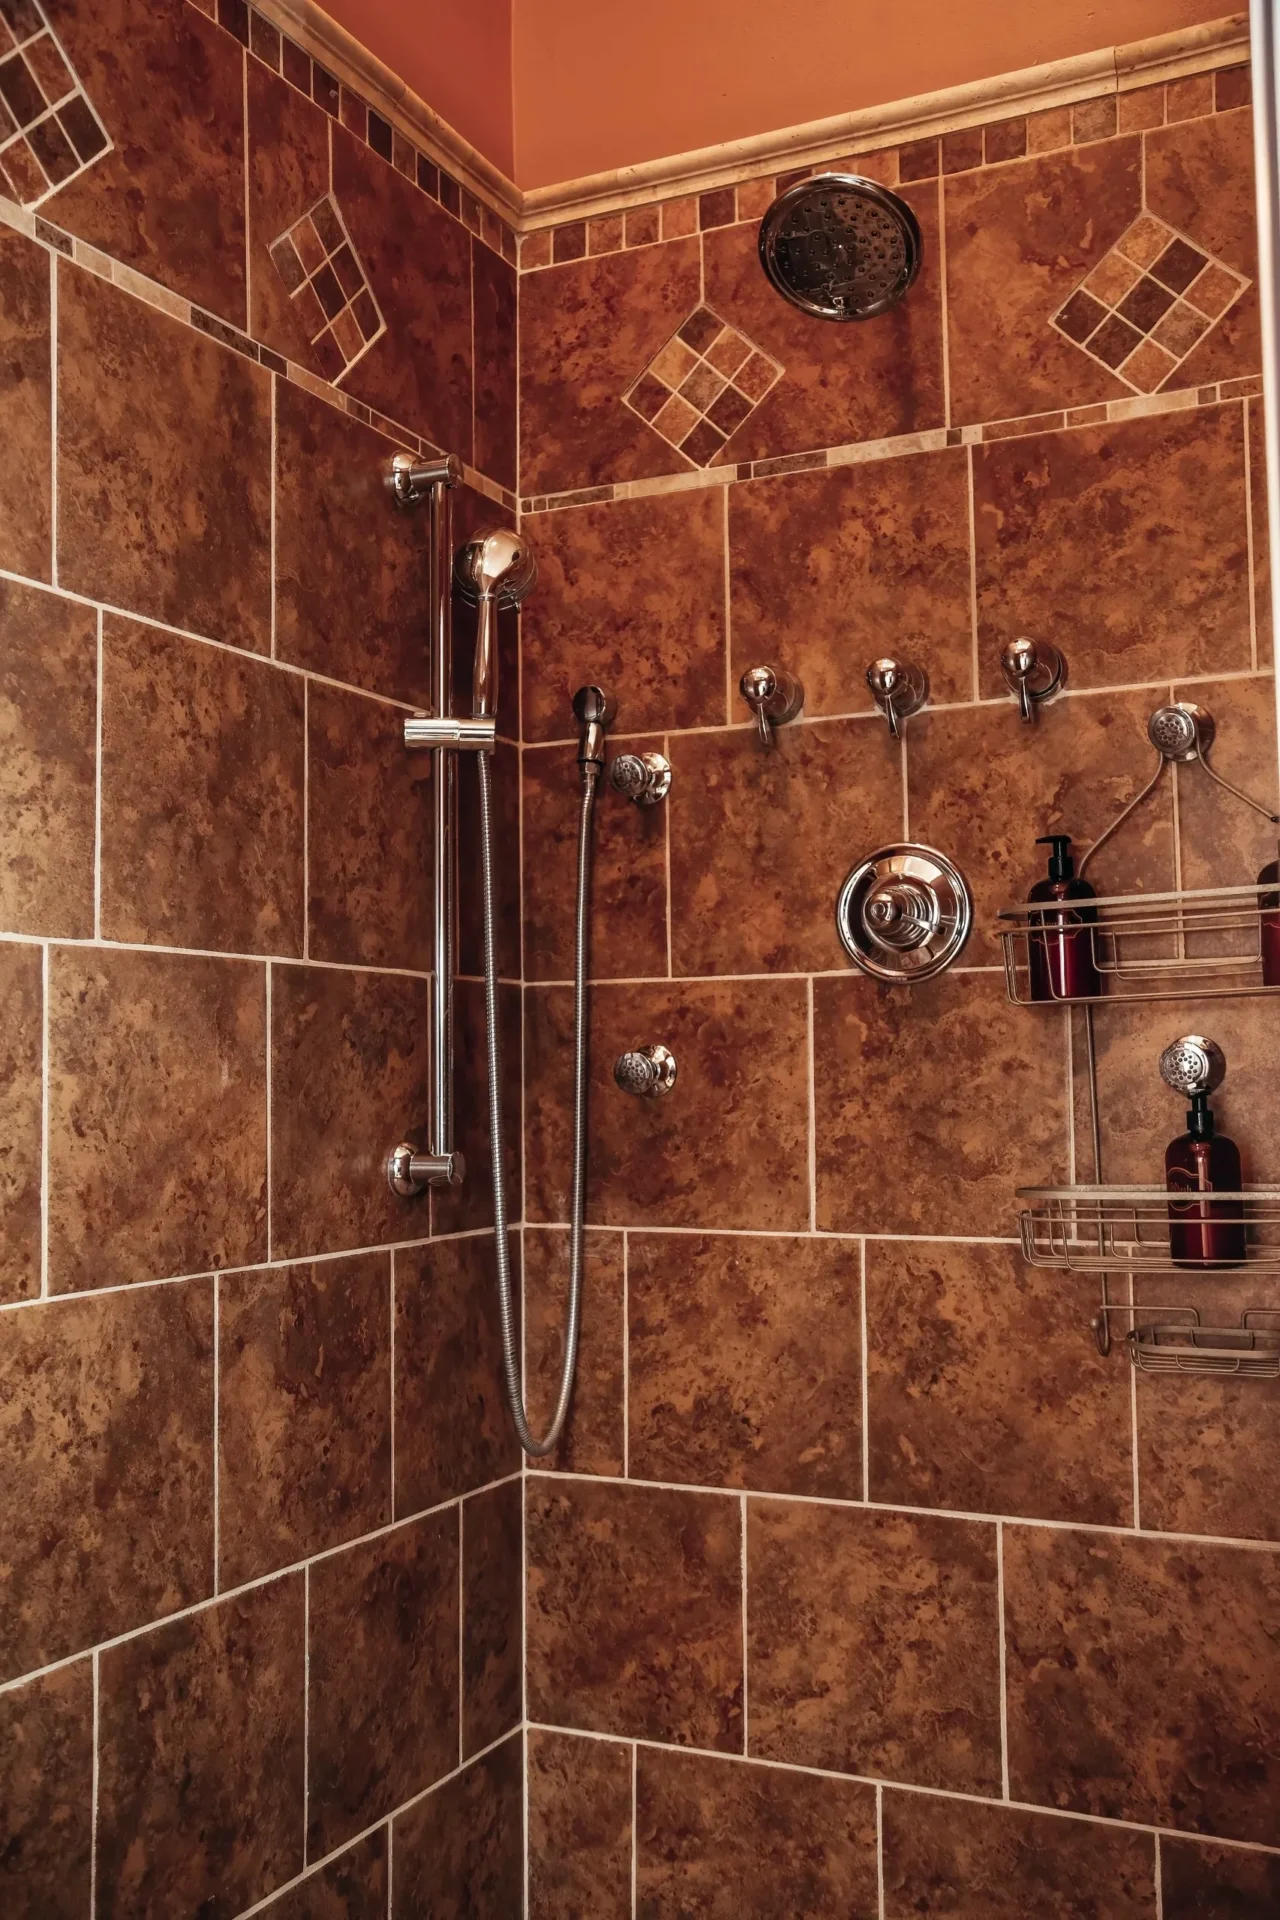 A tiled shower with brown tile and a silver handle.